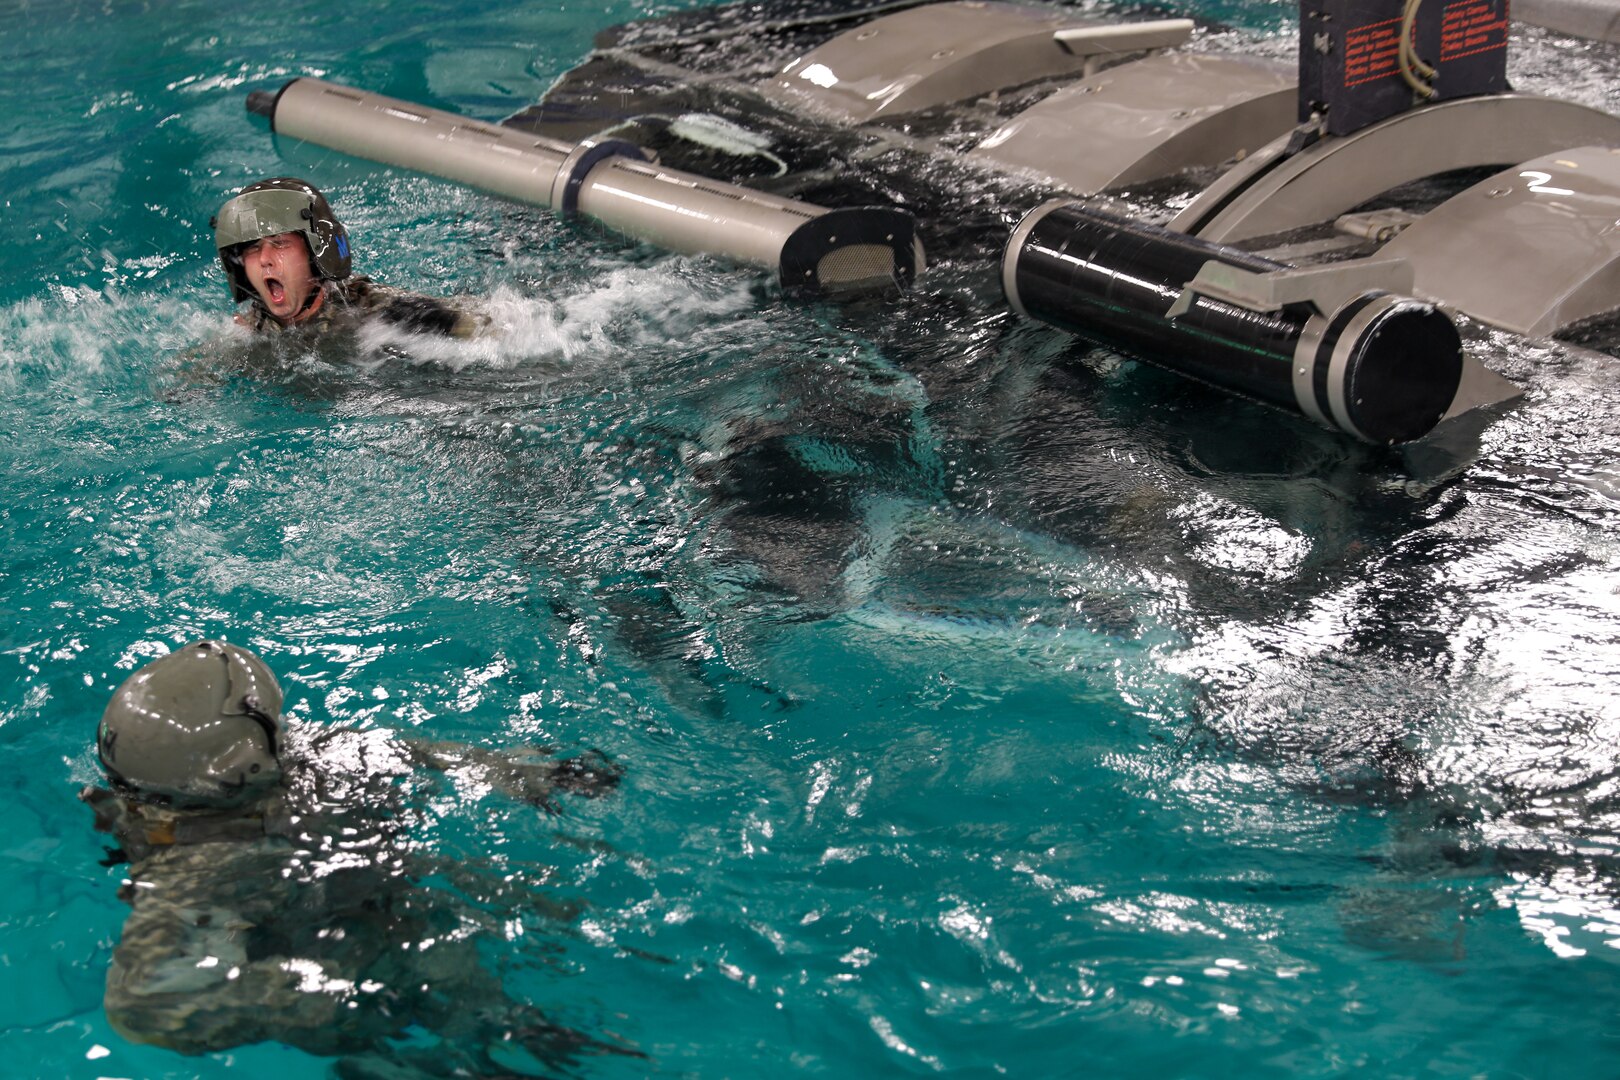 Kentucky Army National Guard Soldiers with the 63rd Theater Aviation Brigade take part in dunker qualification at Ft. Campbell, Ky., Apr. 6-7, 2022. The training prepares helicopter pilots and crew members to escape from a submerged helicopter.